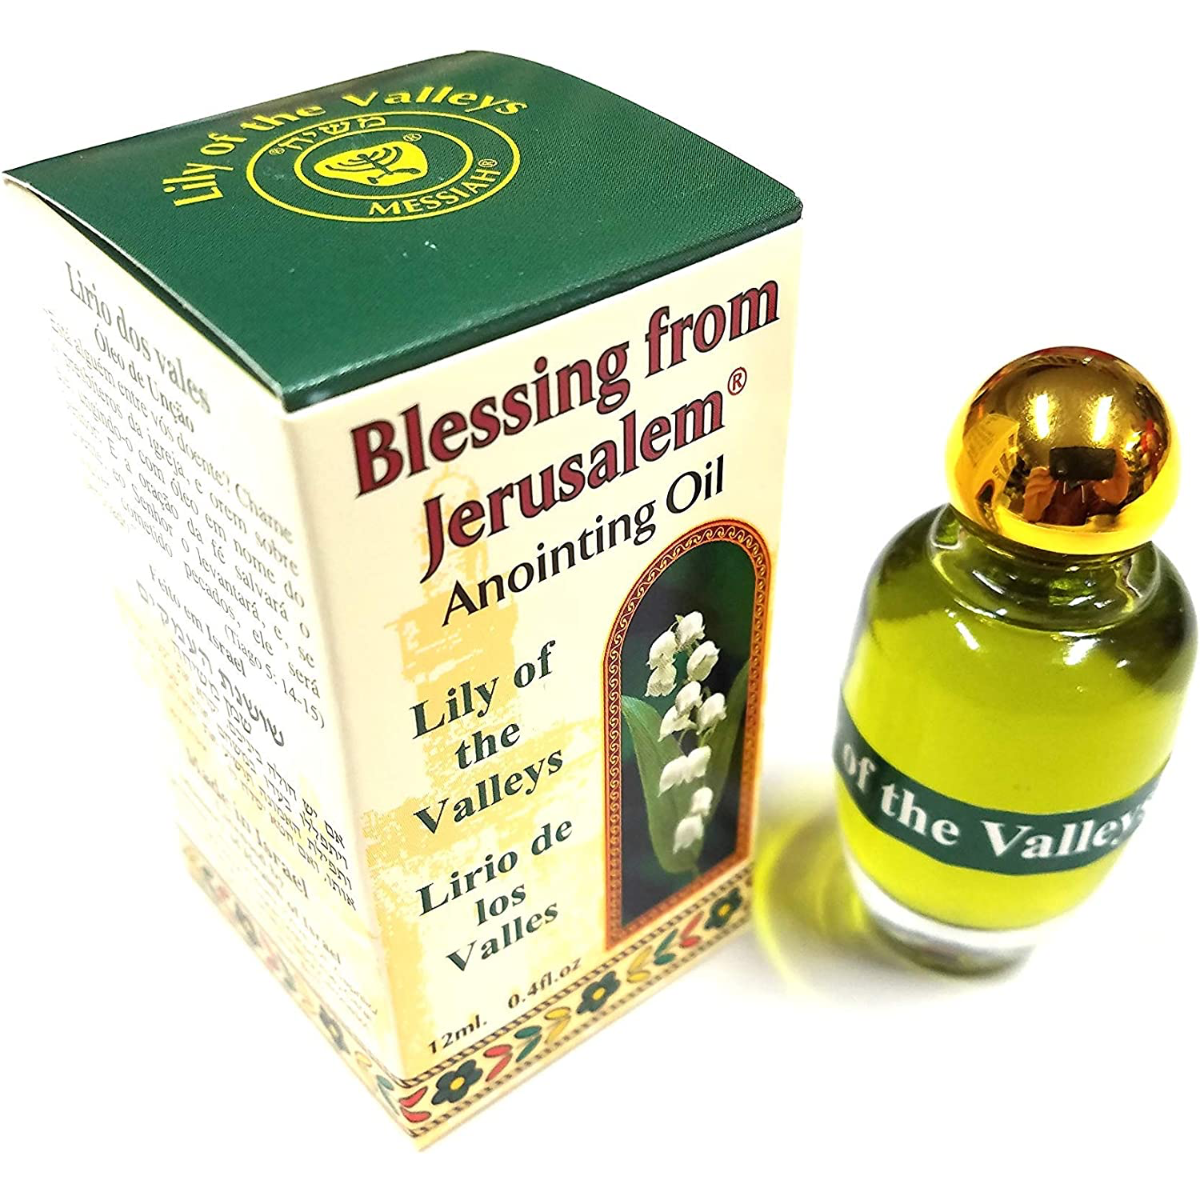 Lily of the Valley Blessing From Jerusalem Anointing Oil 12 ml - 0.4 fl.oz.